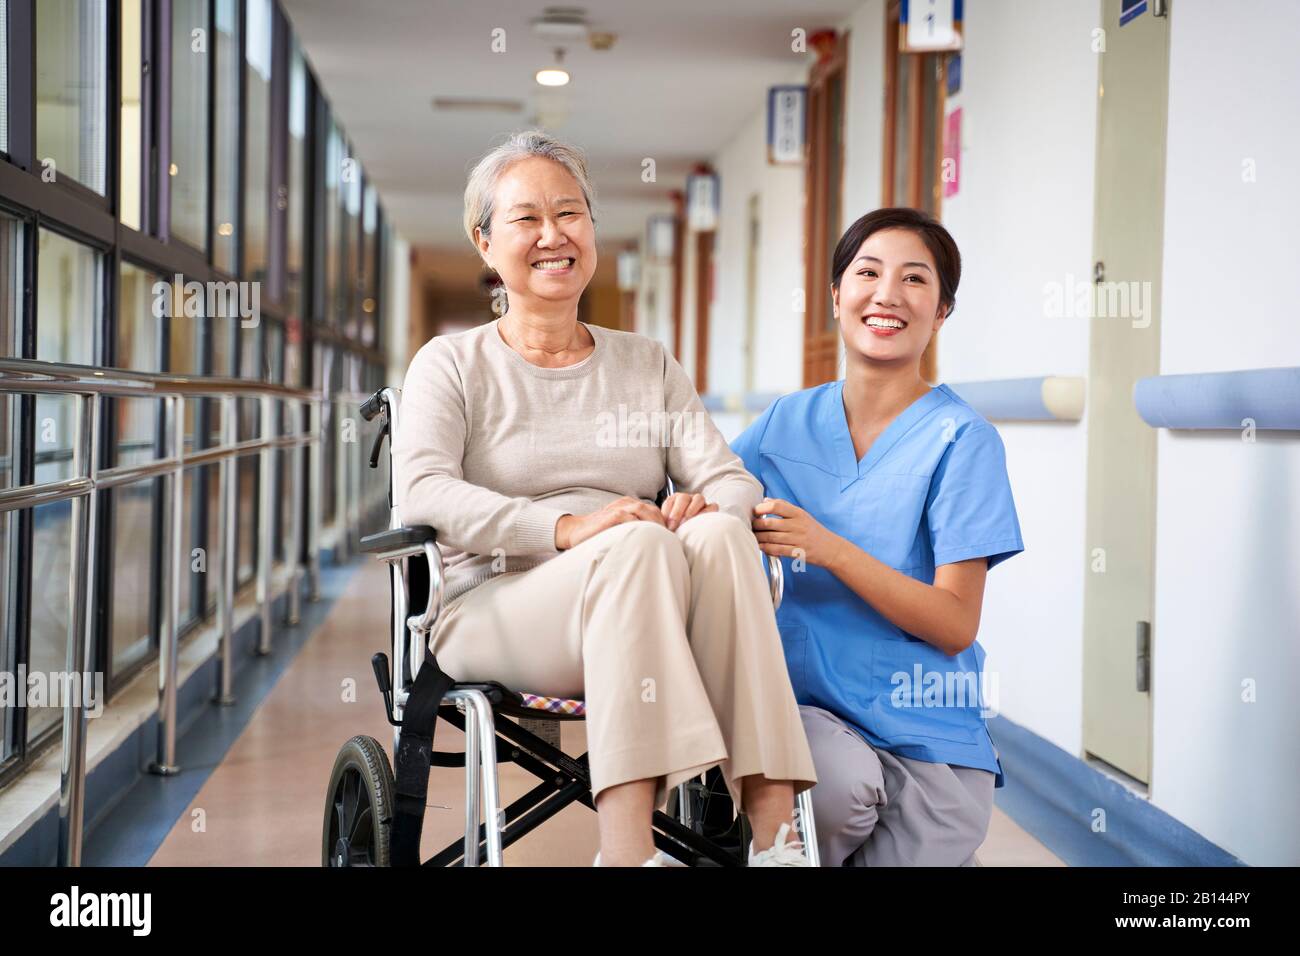 asian senior woman and her caregiver looking at camera smiling Stock Photo